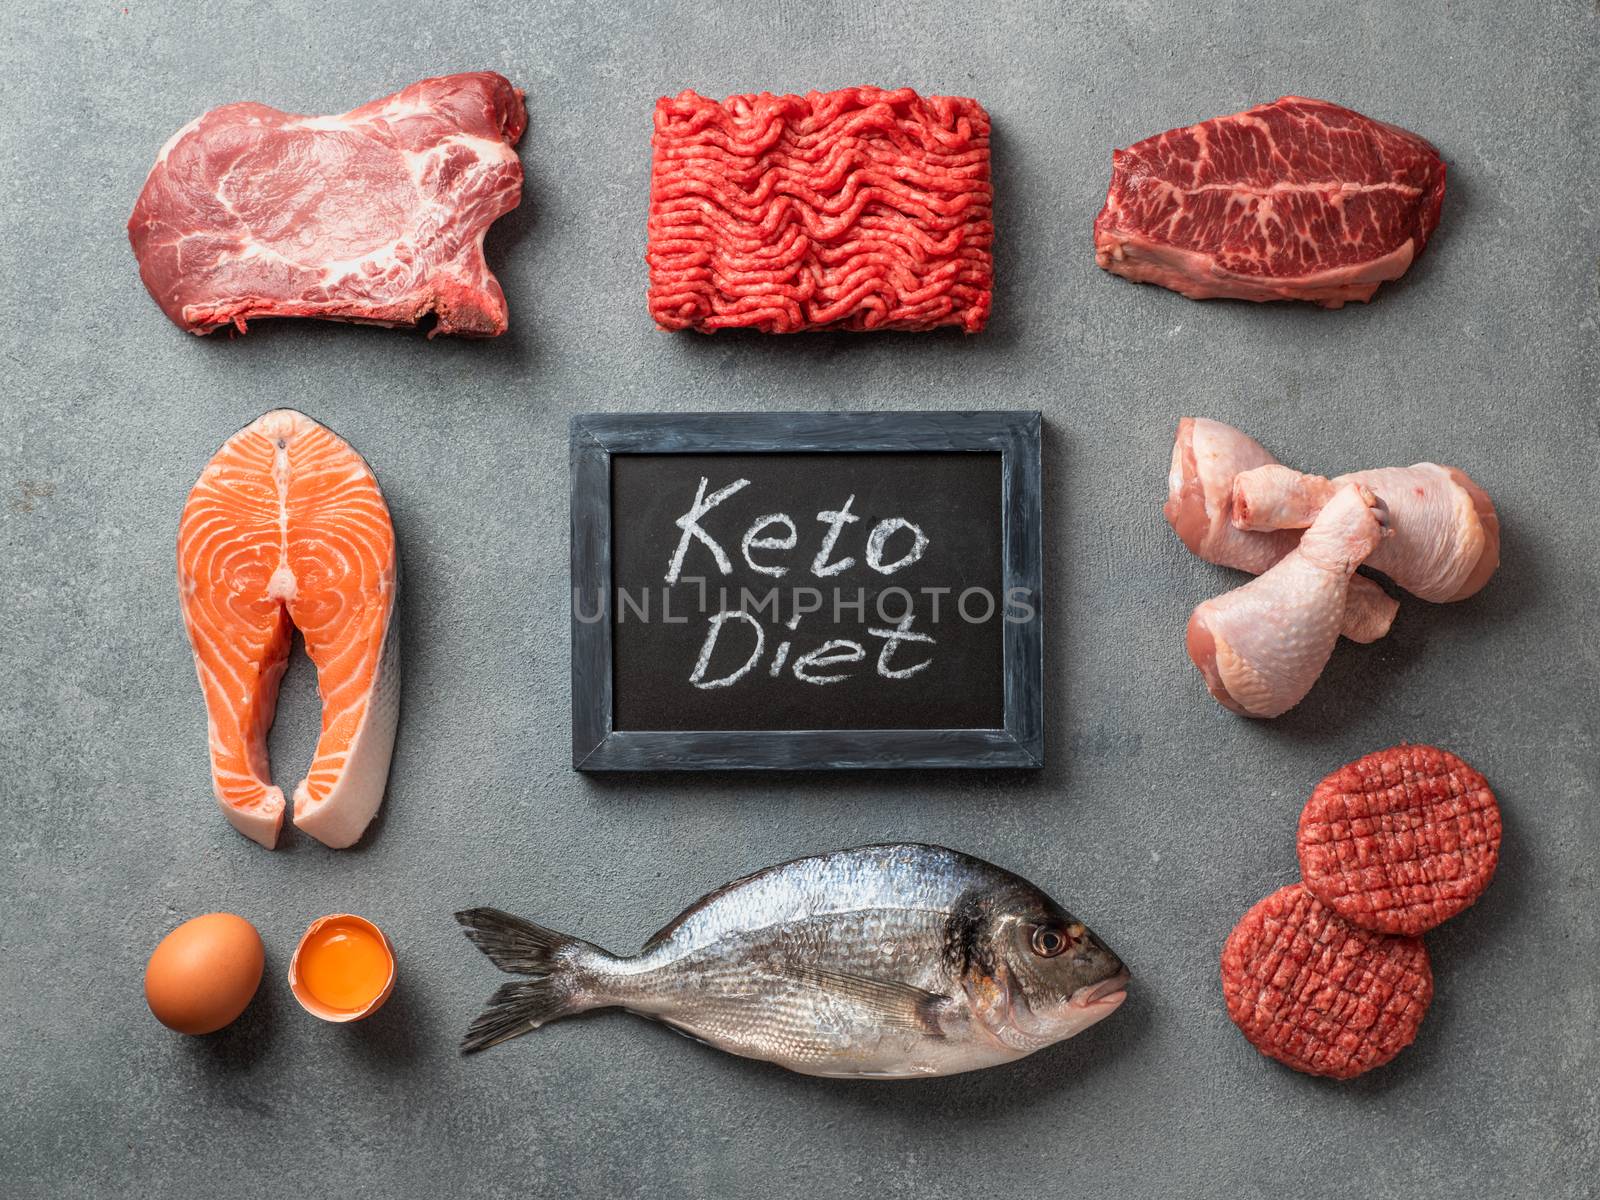 Keto diet concept. Raw ingredients for low carb diet - meat, poultry, fish, seafood, eggs, beef bones for bone broth and words Keto Diet on gray stone background. Top view or flat lay.